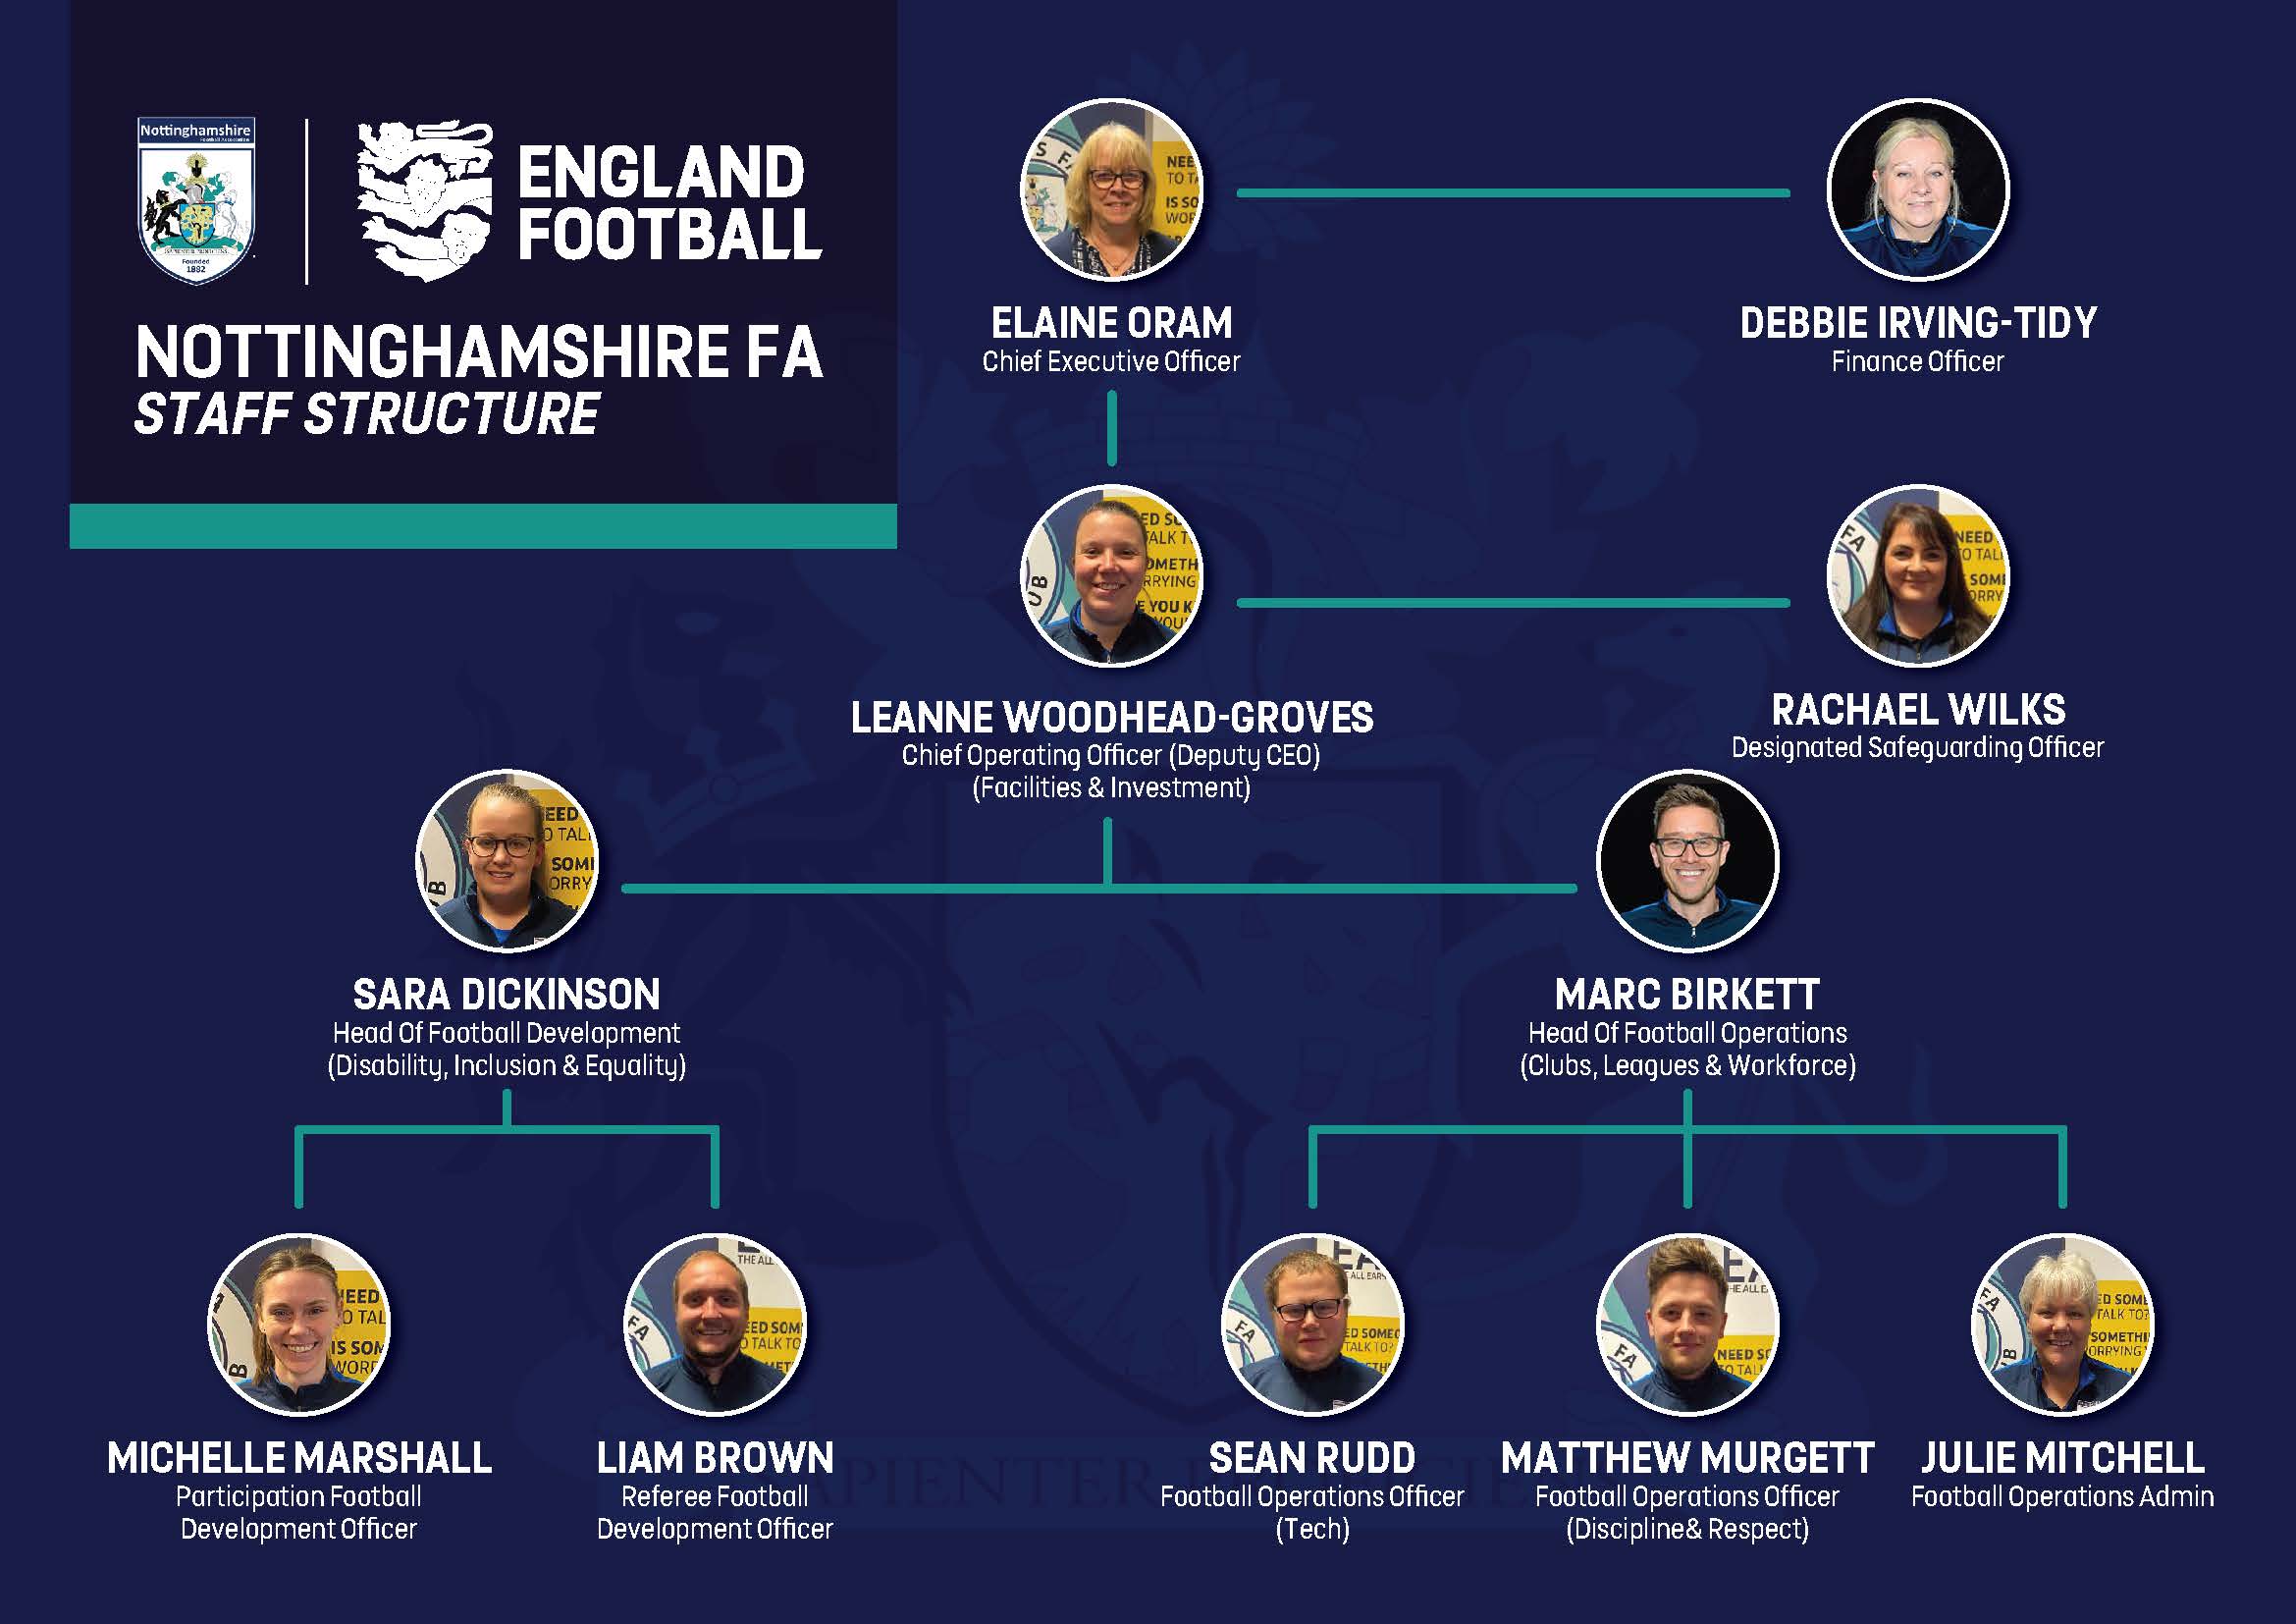 Notts FA staff structure